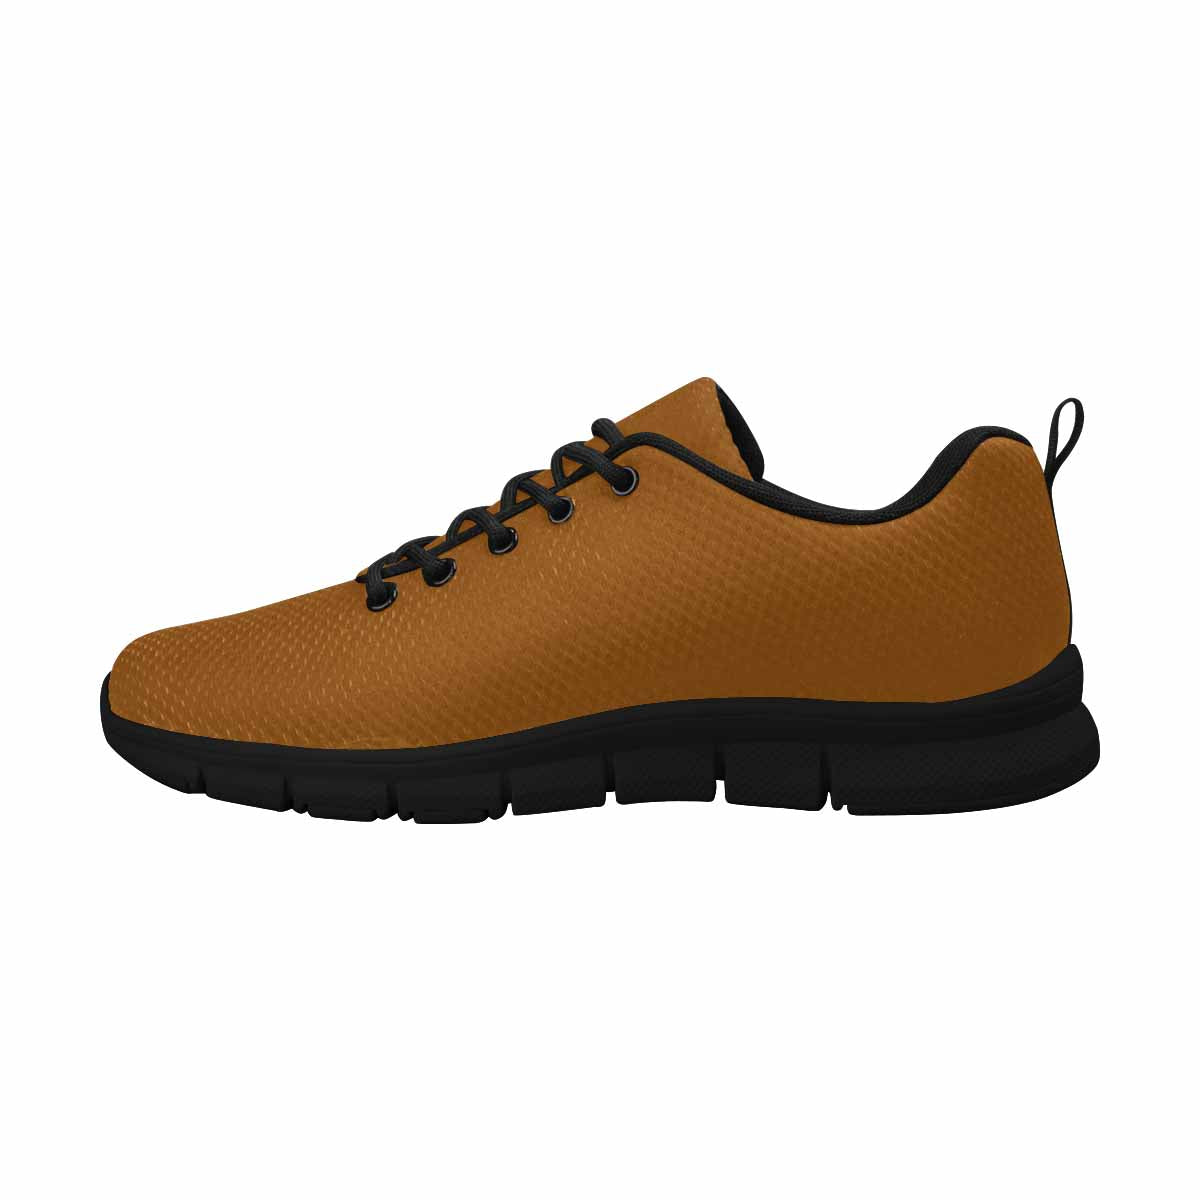 Sneakers For Men, Brown Running Shoes